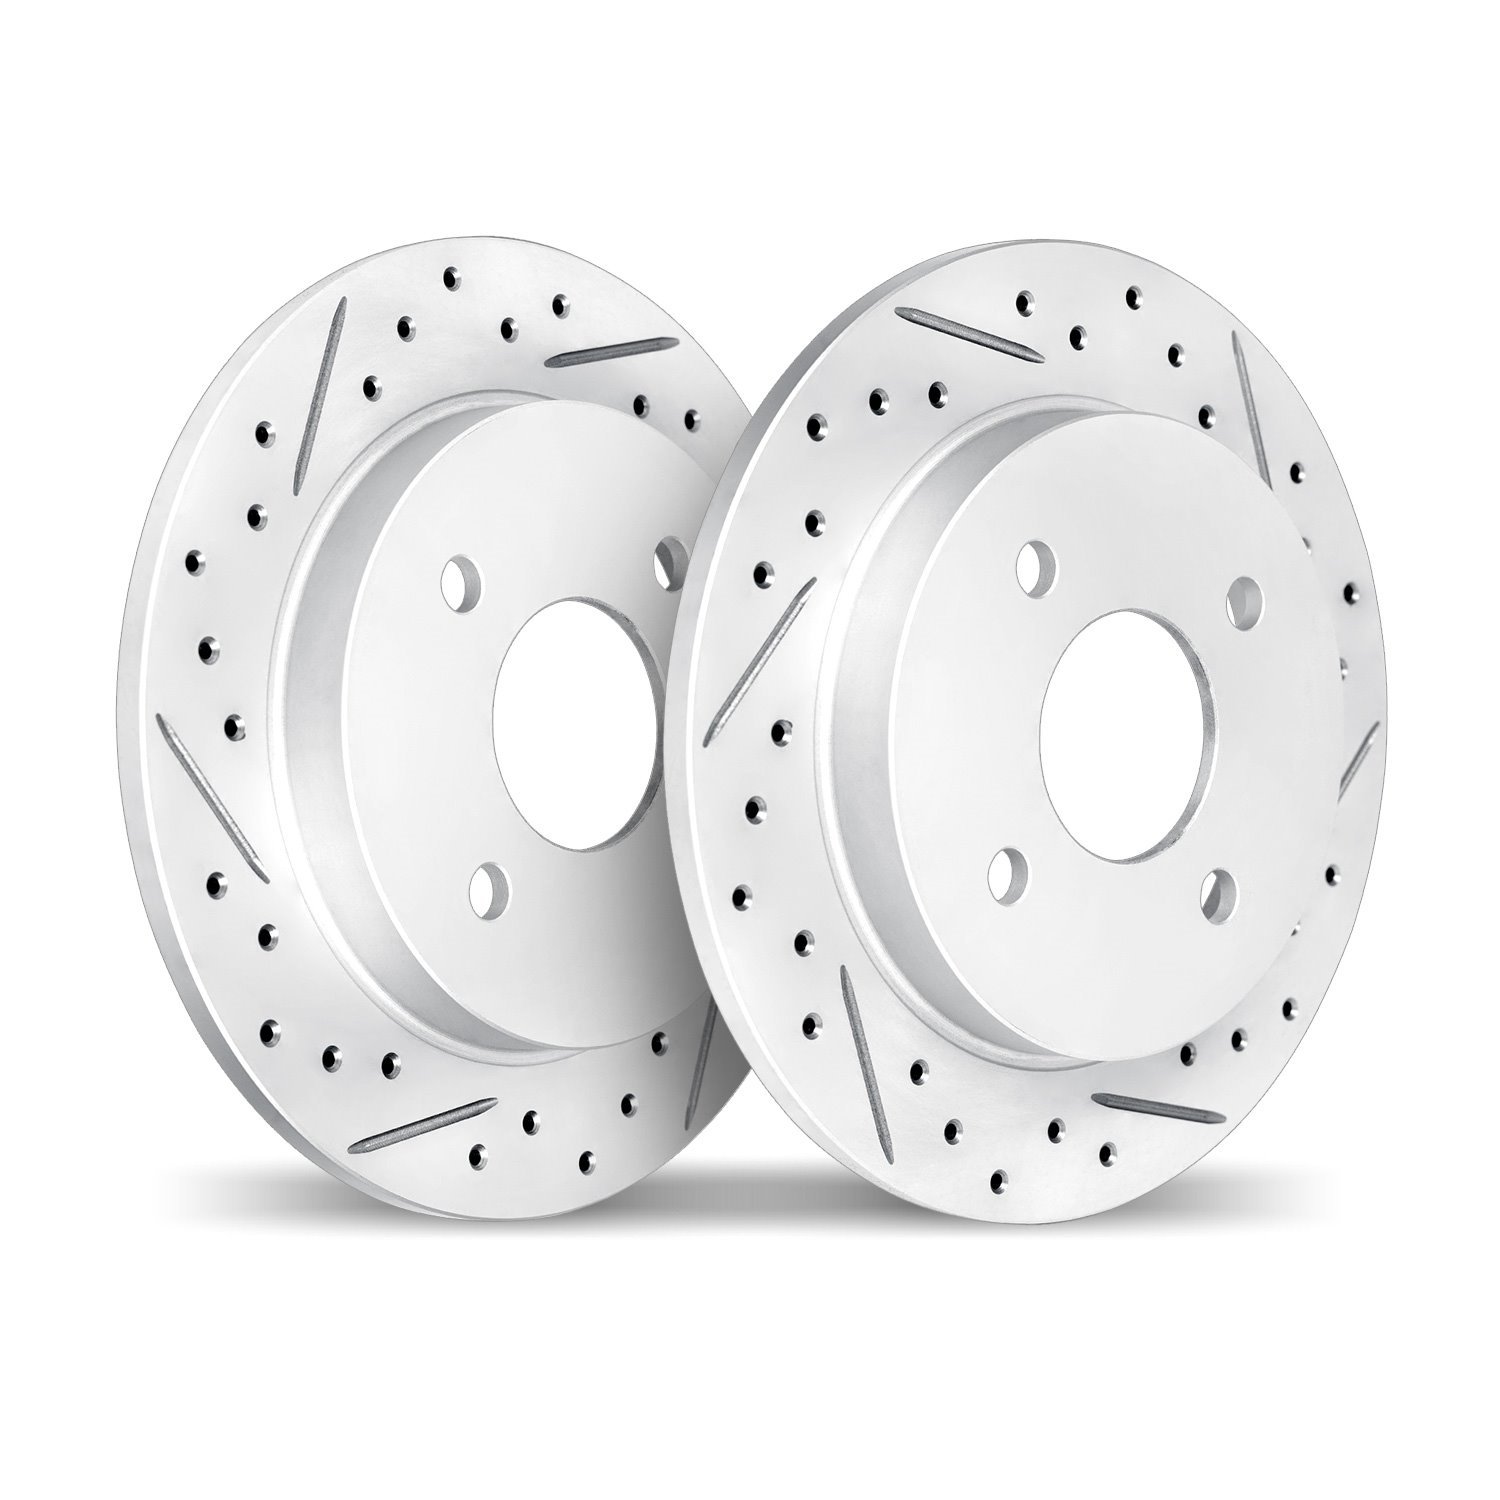 2002-80044 Geoperformance Drilled/Slotted Brake Rotors, 1990-1993 Ford/Lincoln/Mercury/Mazda, Position: Rear